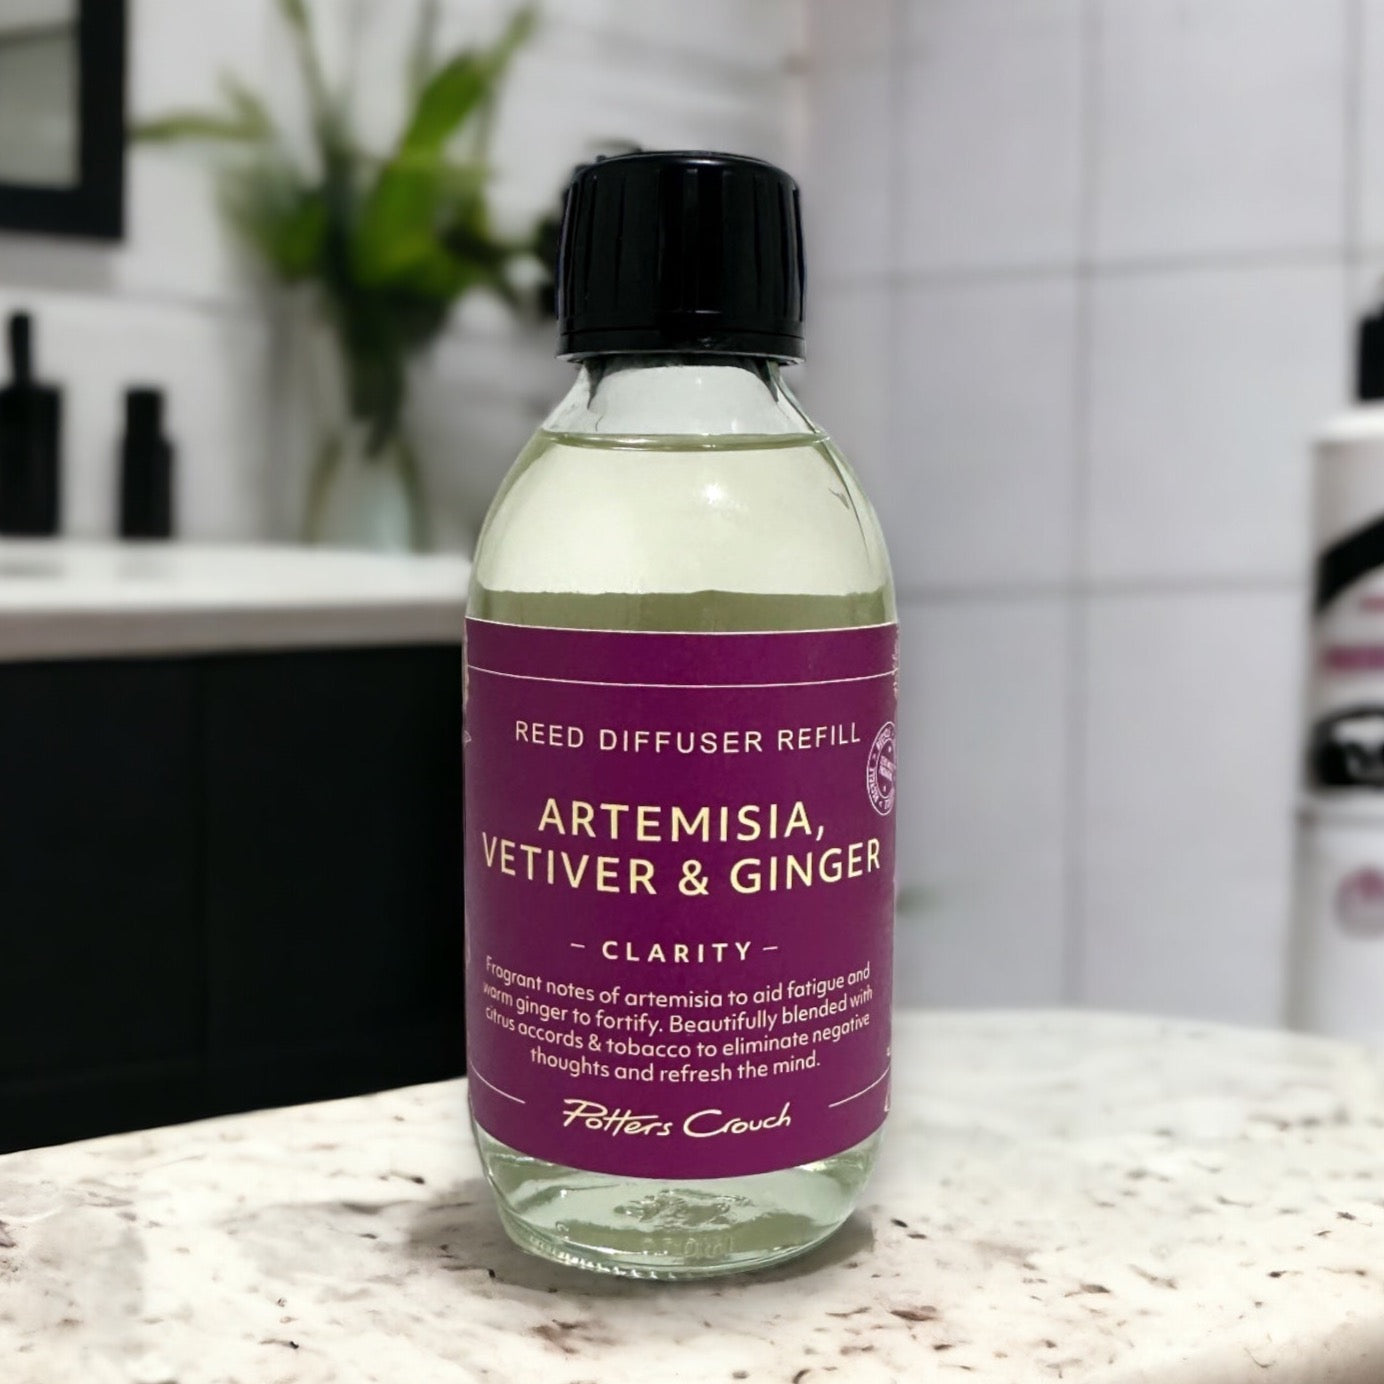 Clarity Diffuser Refill with Artemisia, Vetiver & Ginger